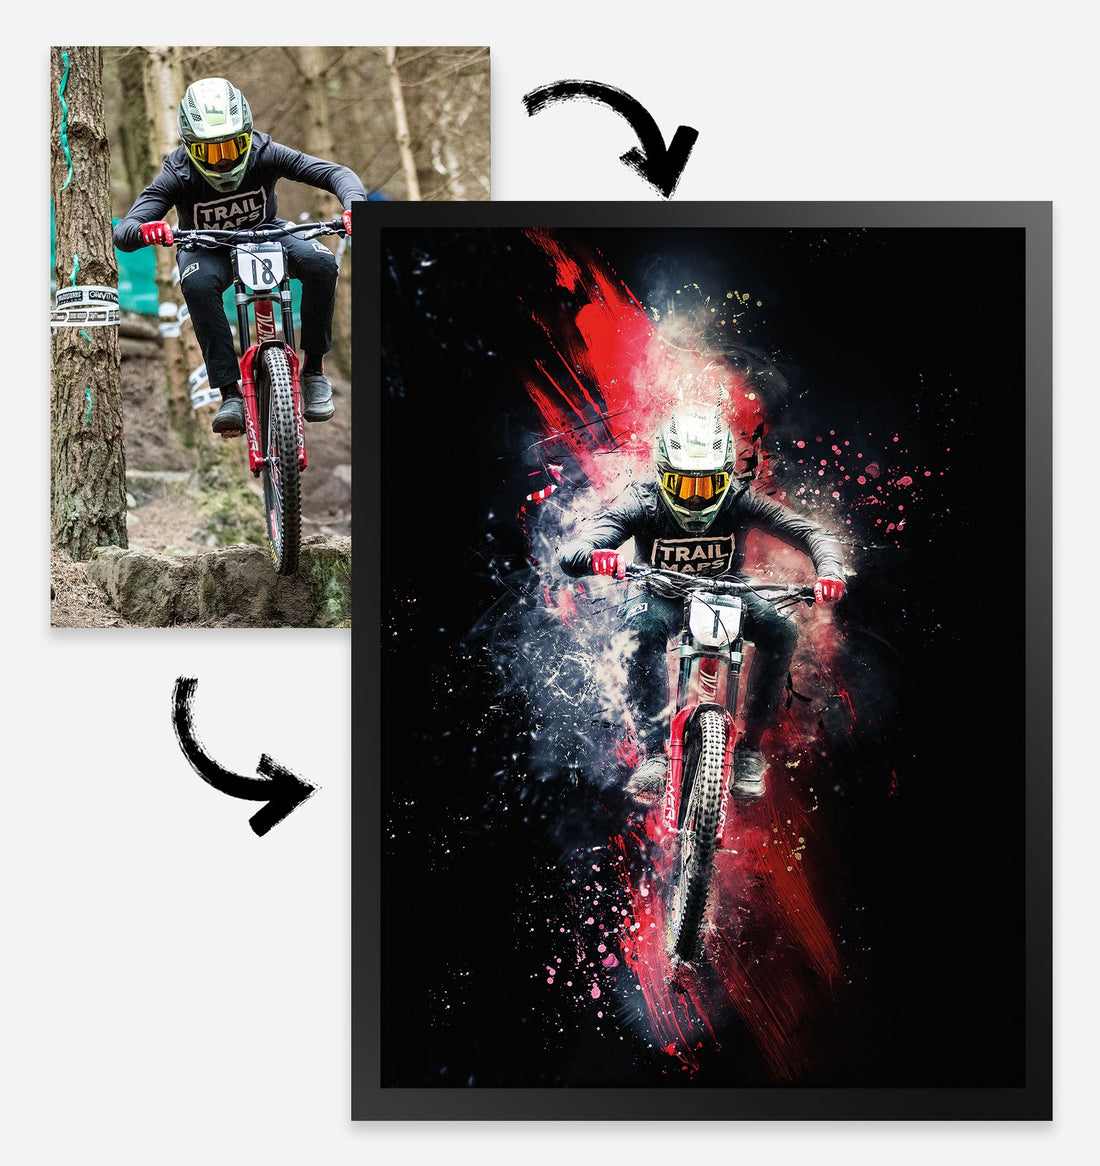 TrailMaps team up with Chris Davison to offer custom photo retouches of mountain bike, motocross, and road cycling pictures